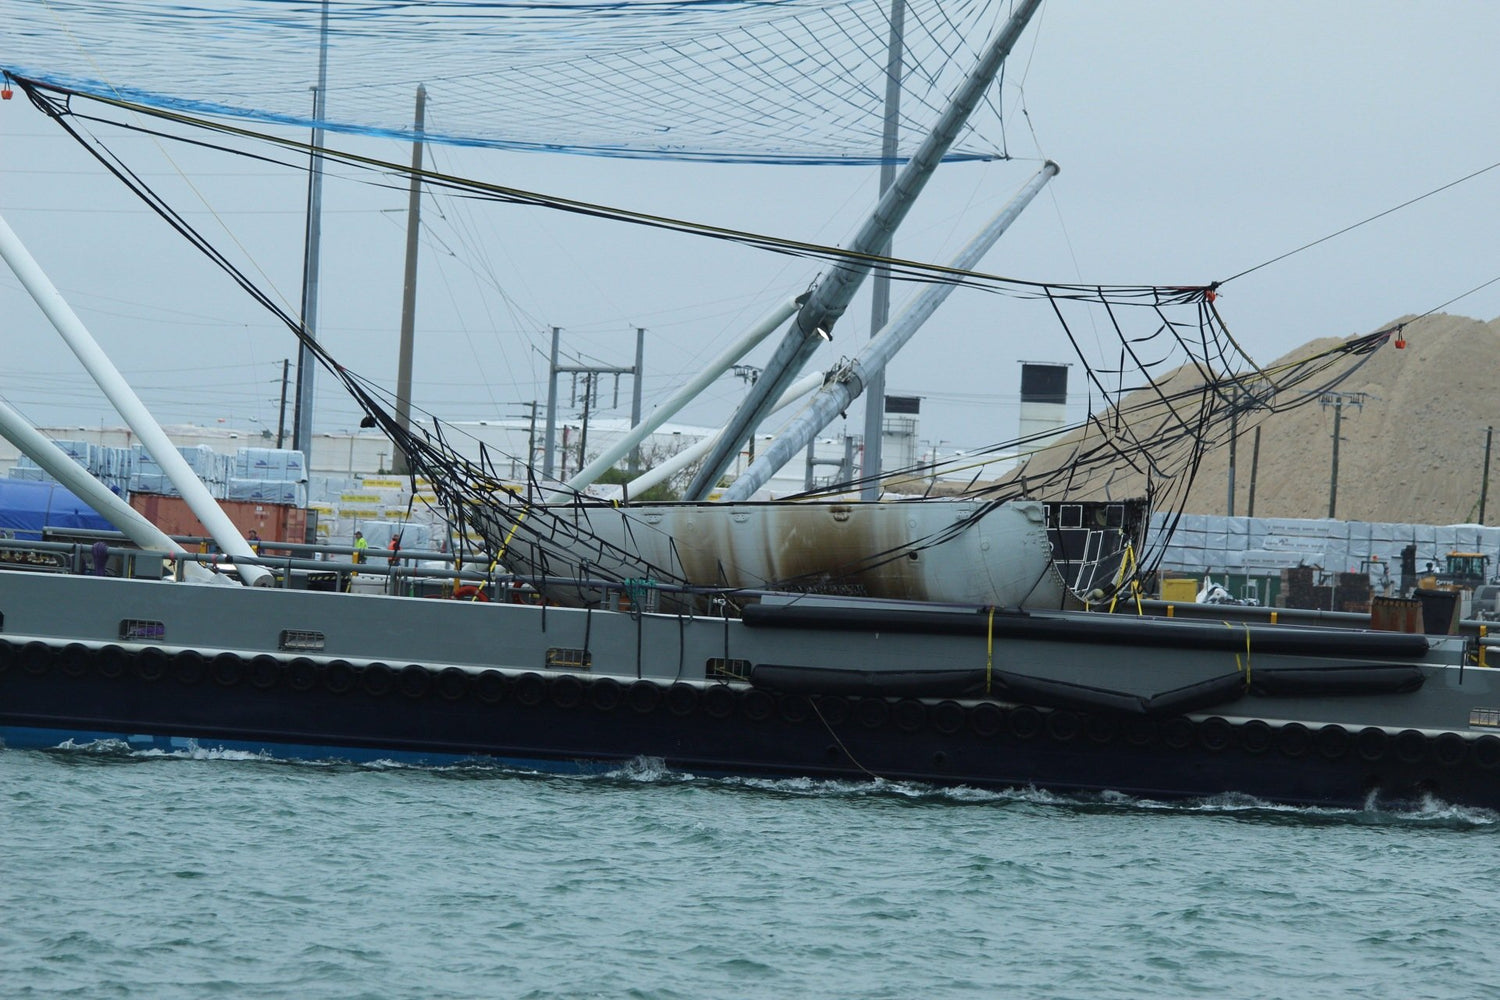 SpaceX's twin fairing catcher ships "Ms. Chief & Ms. Tree" come home after soft water landing